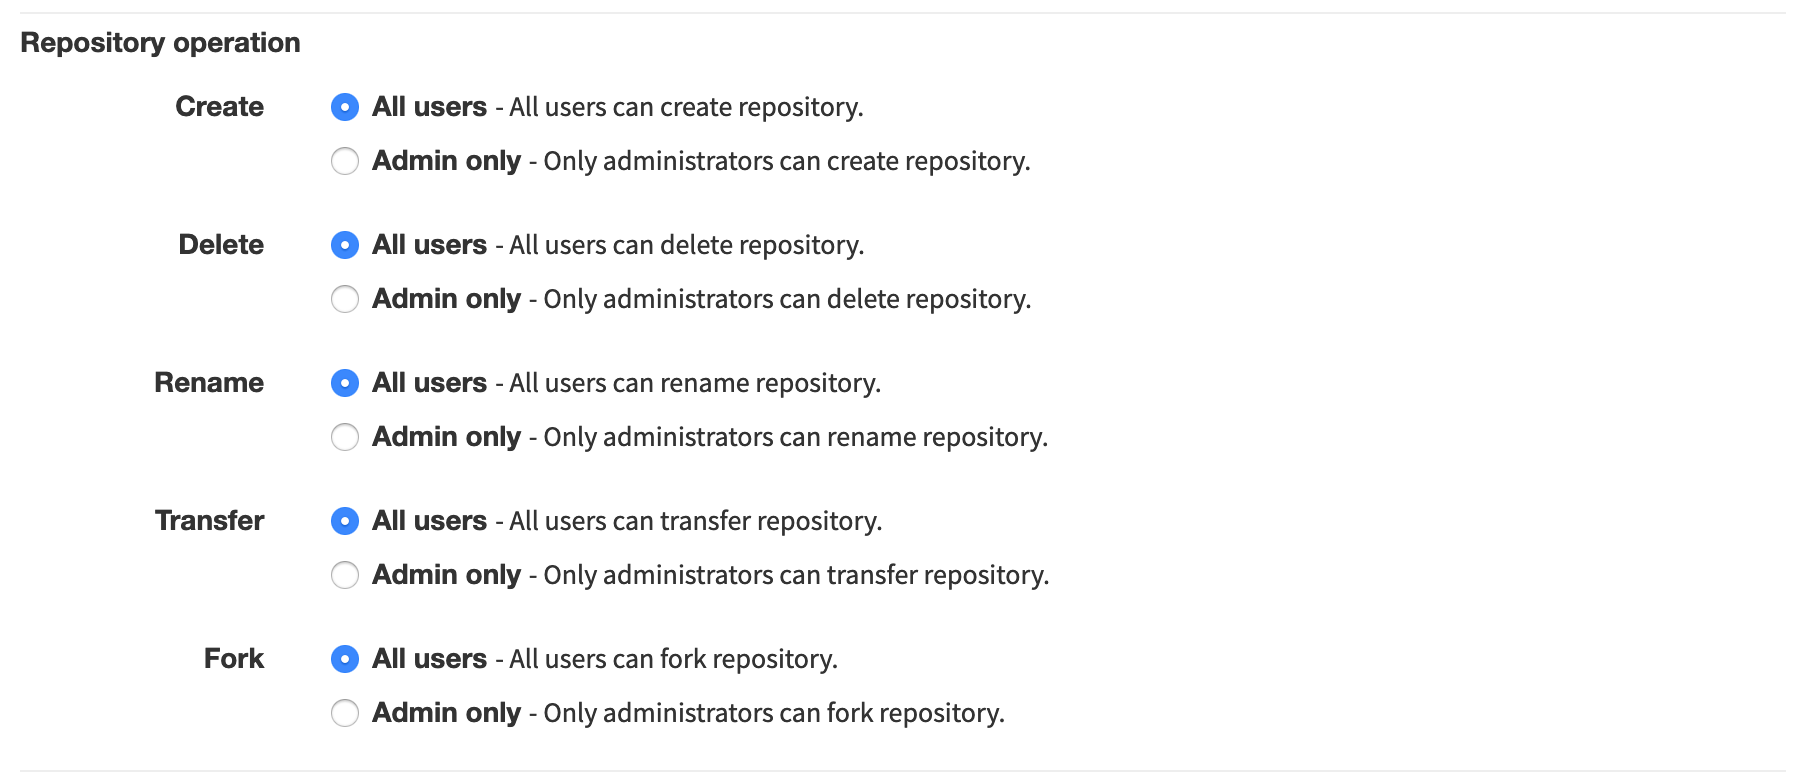 Restrict repository operations